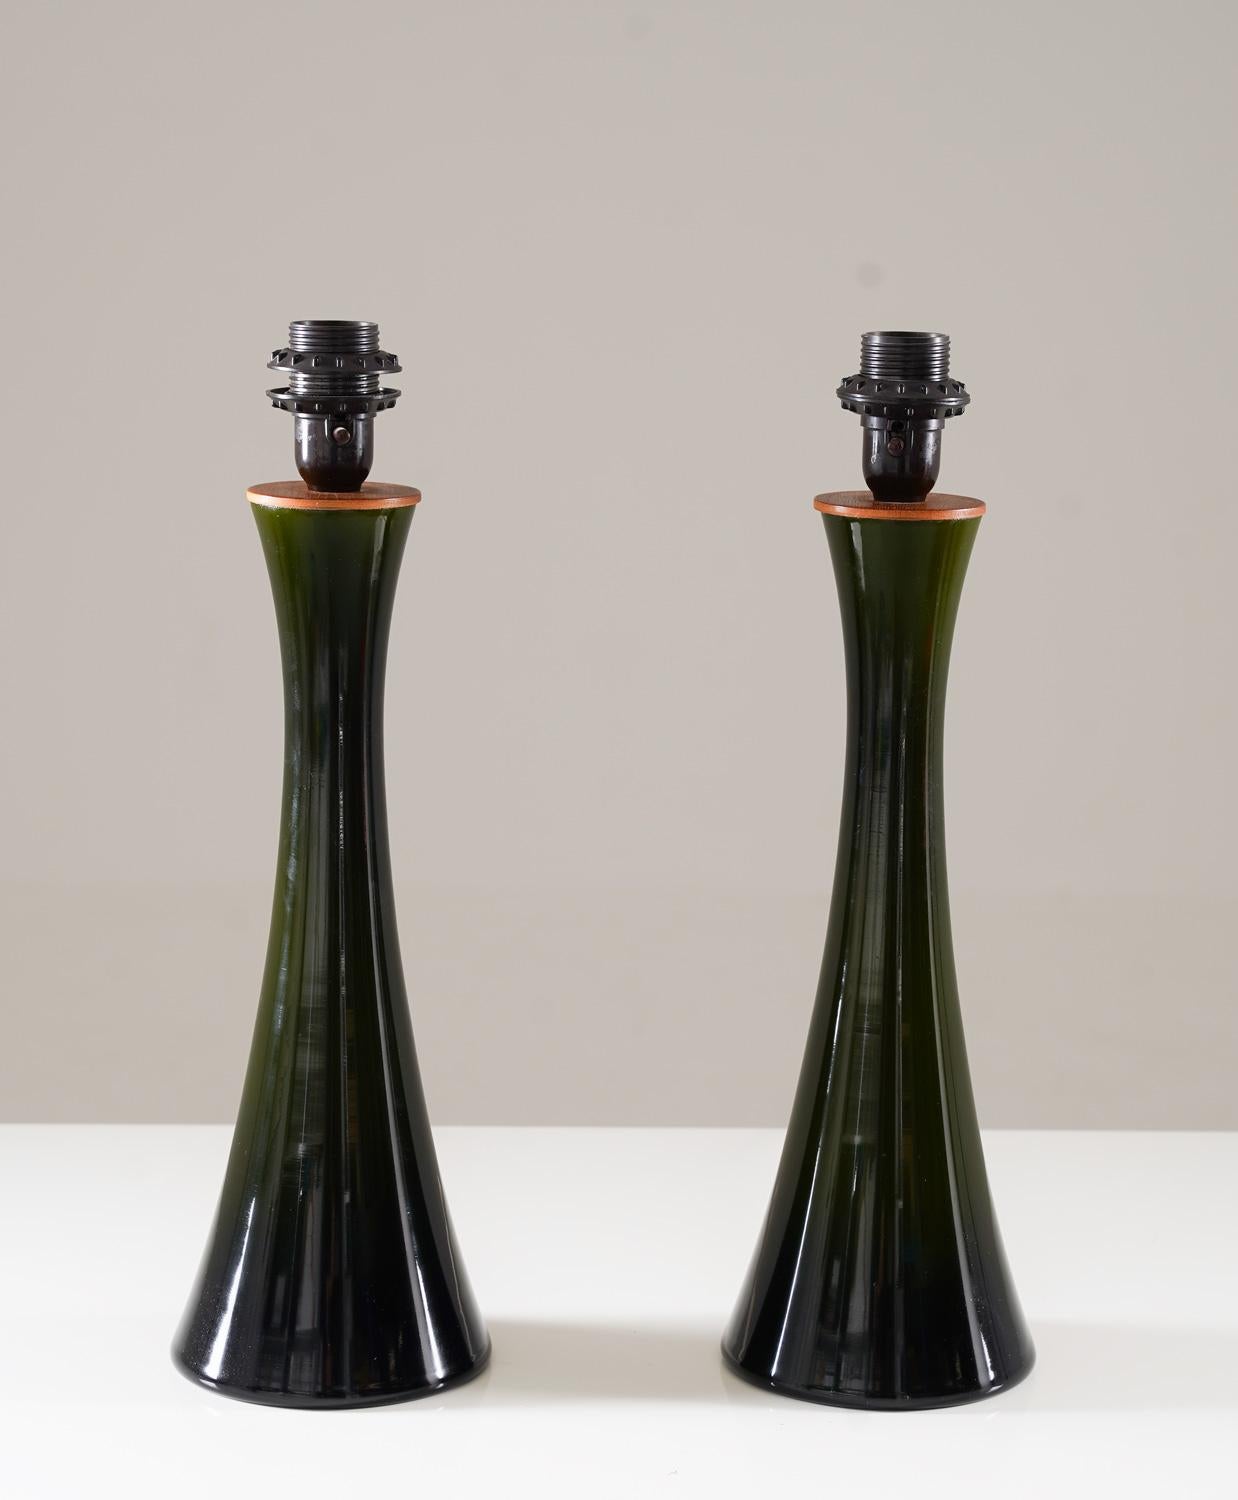 Pair of table lamps manufactured by Bergboms, Sweden, 1960s.
The lamps are made of dark green hourglass-shaped glass with a teak top that holds the light source.
The (new) shades can be included upon request.
Condition: Very good original condition